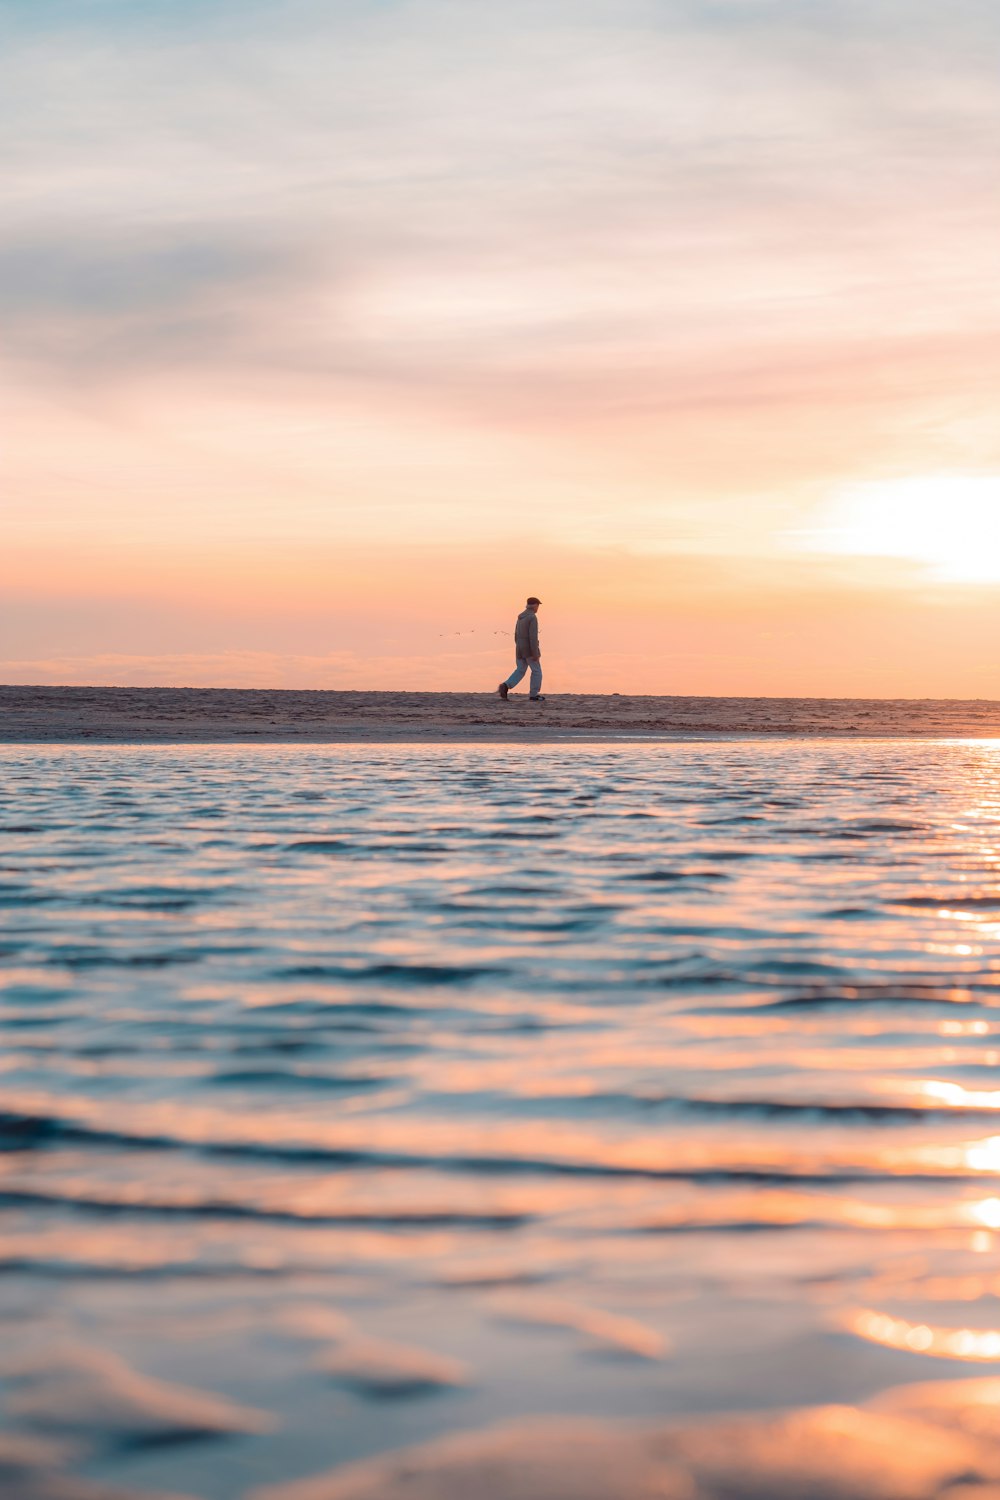 a man standing on a surfboard in the ocean at sunset